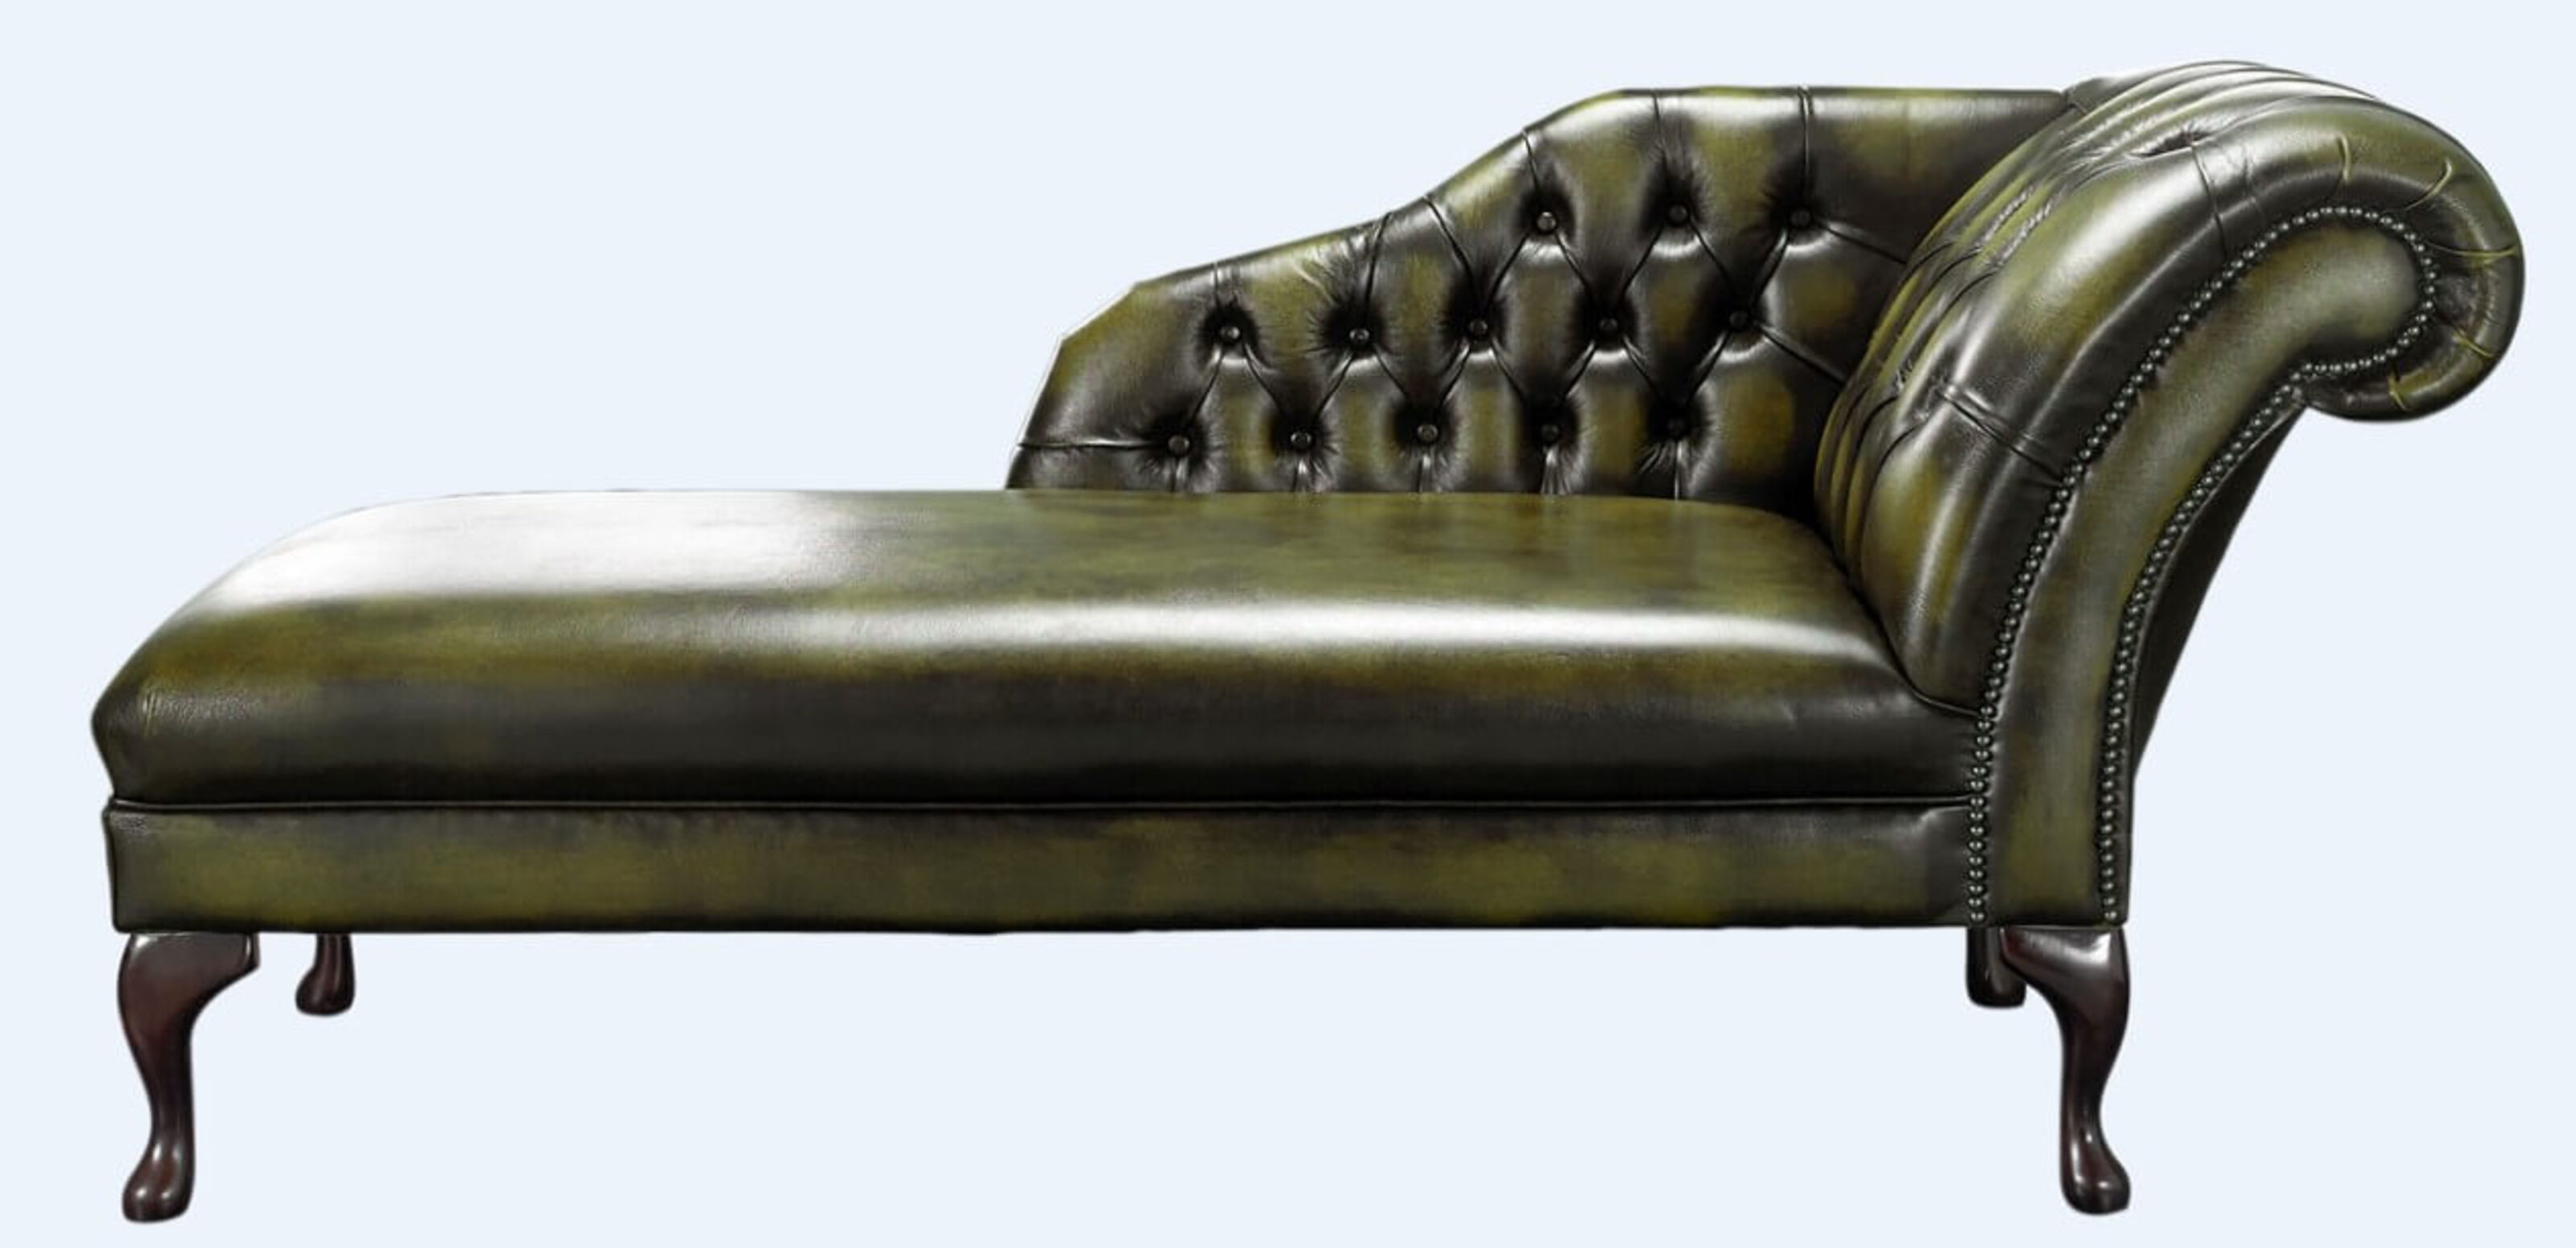 Olive Green Chesterfield Chaise Lounge, Olive Green Leather Sofa Bed